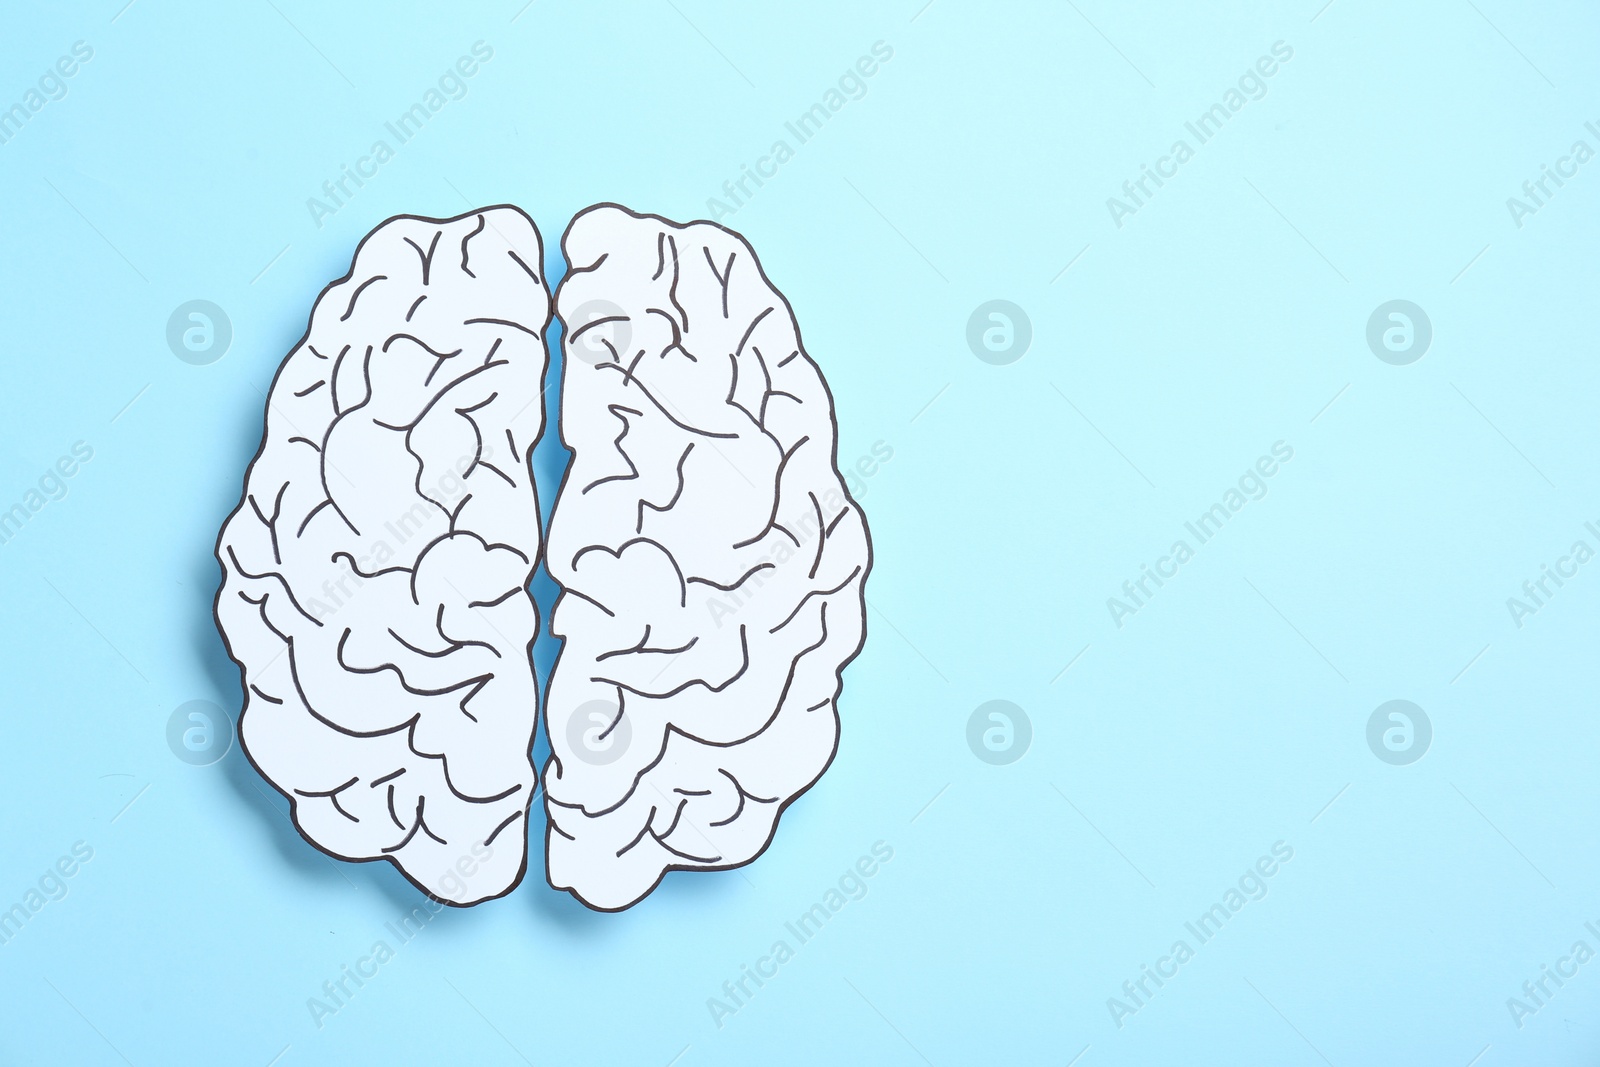 Photo of Paper brain hemispheres on light blue background, top view. Space for text